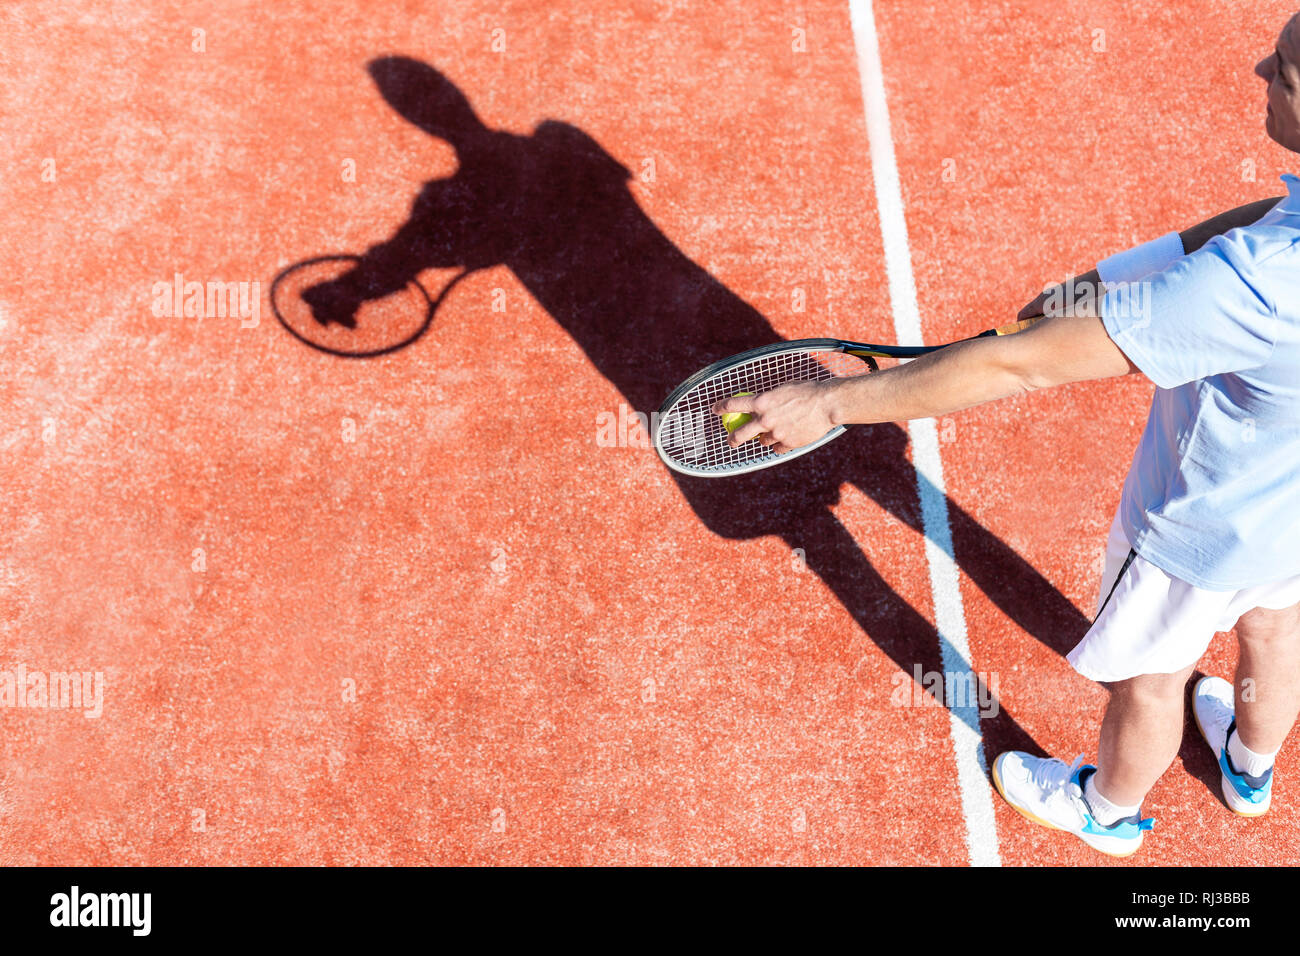 High angle view of mature man serving tennis ball on red court Stock Photo